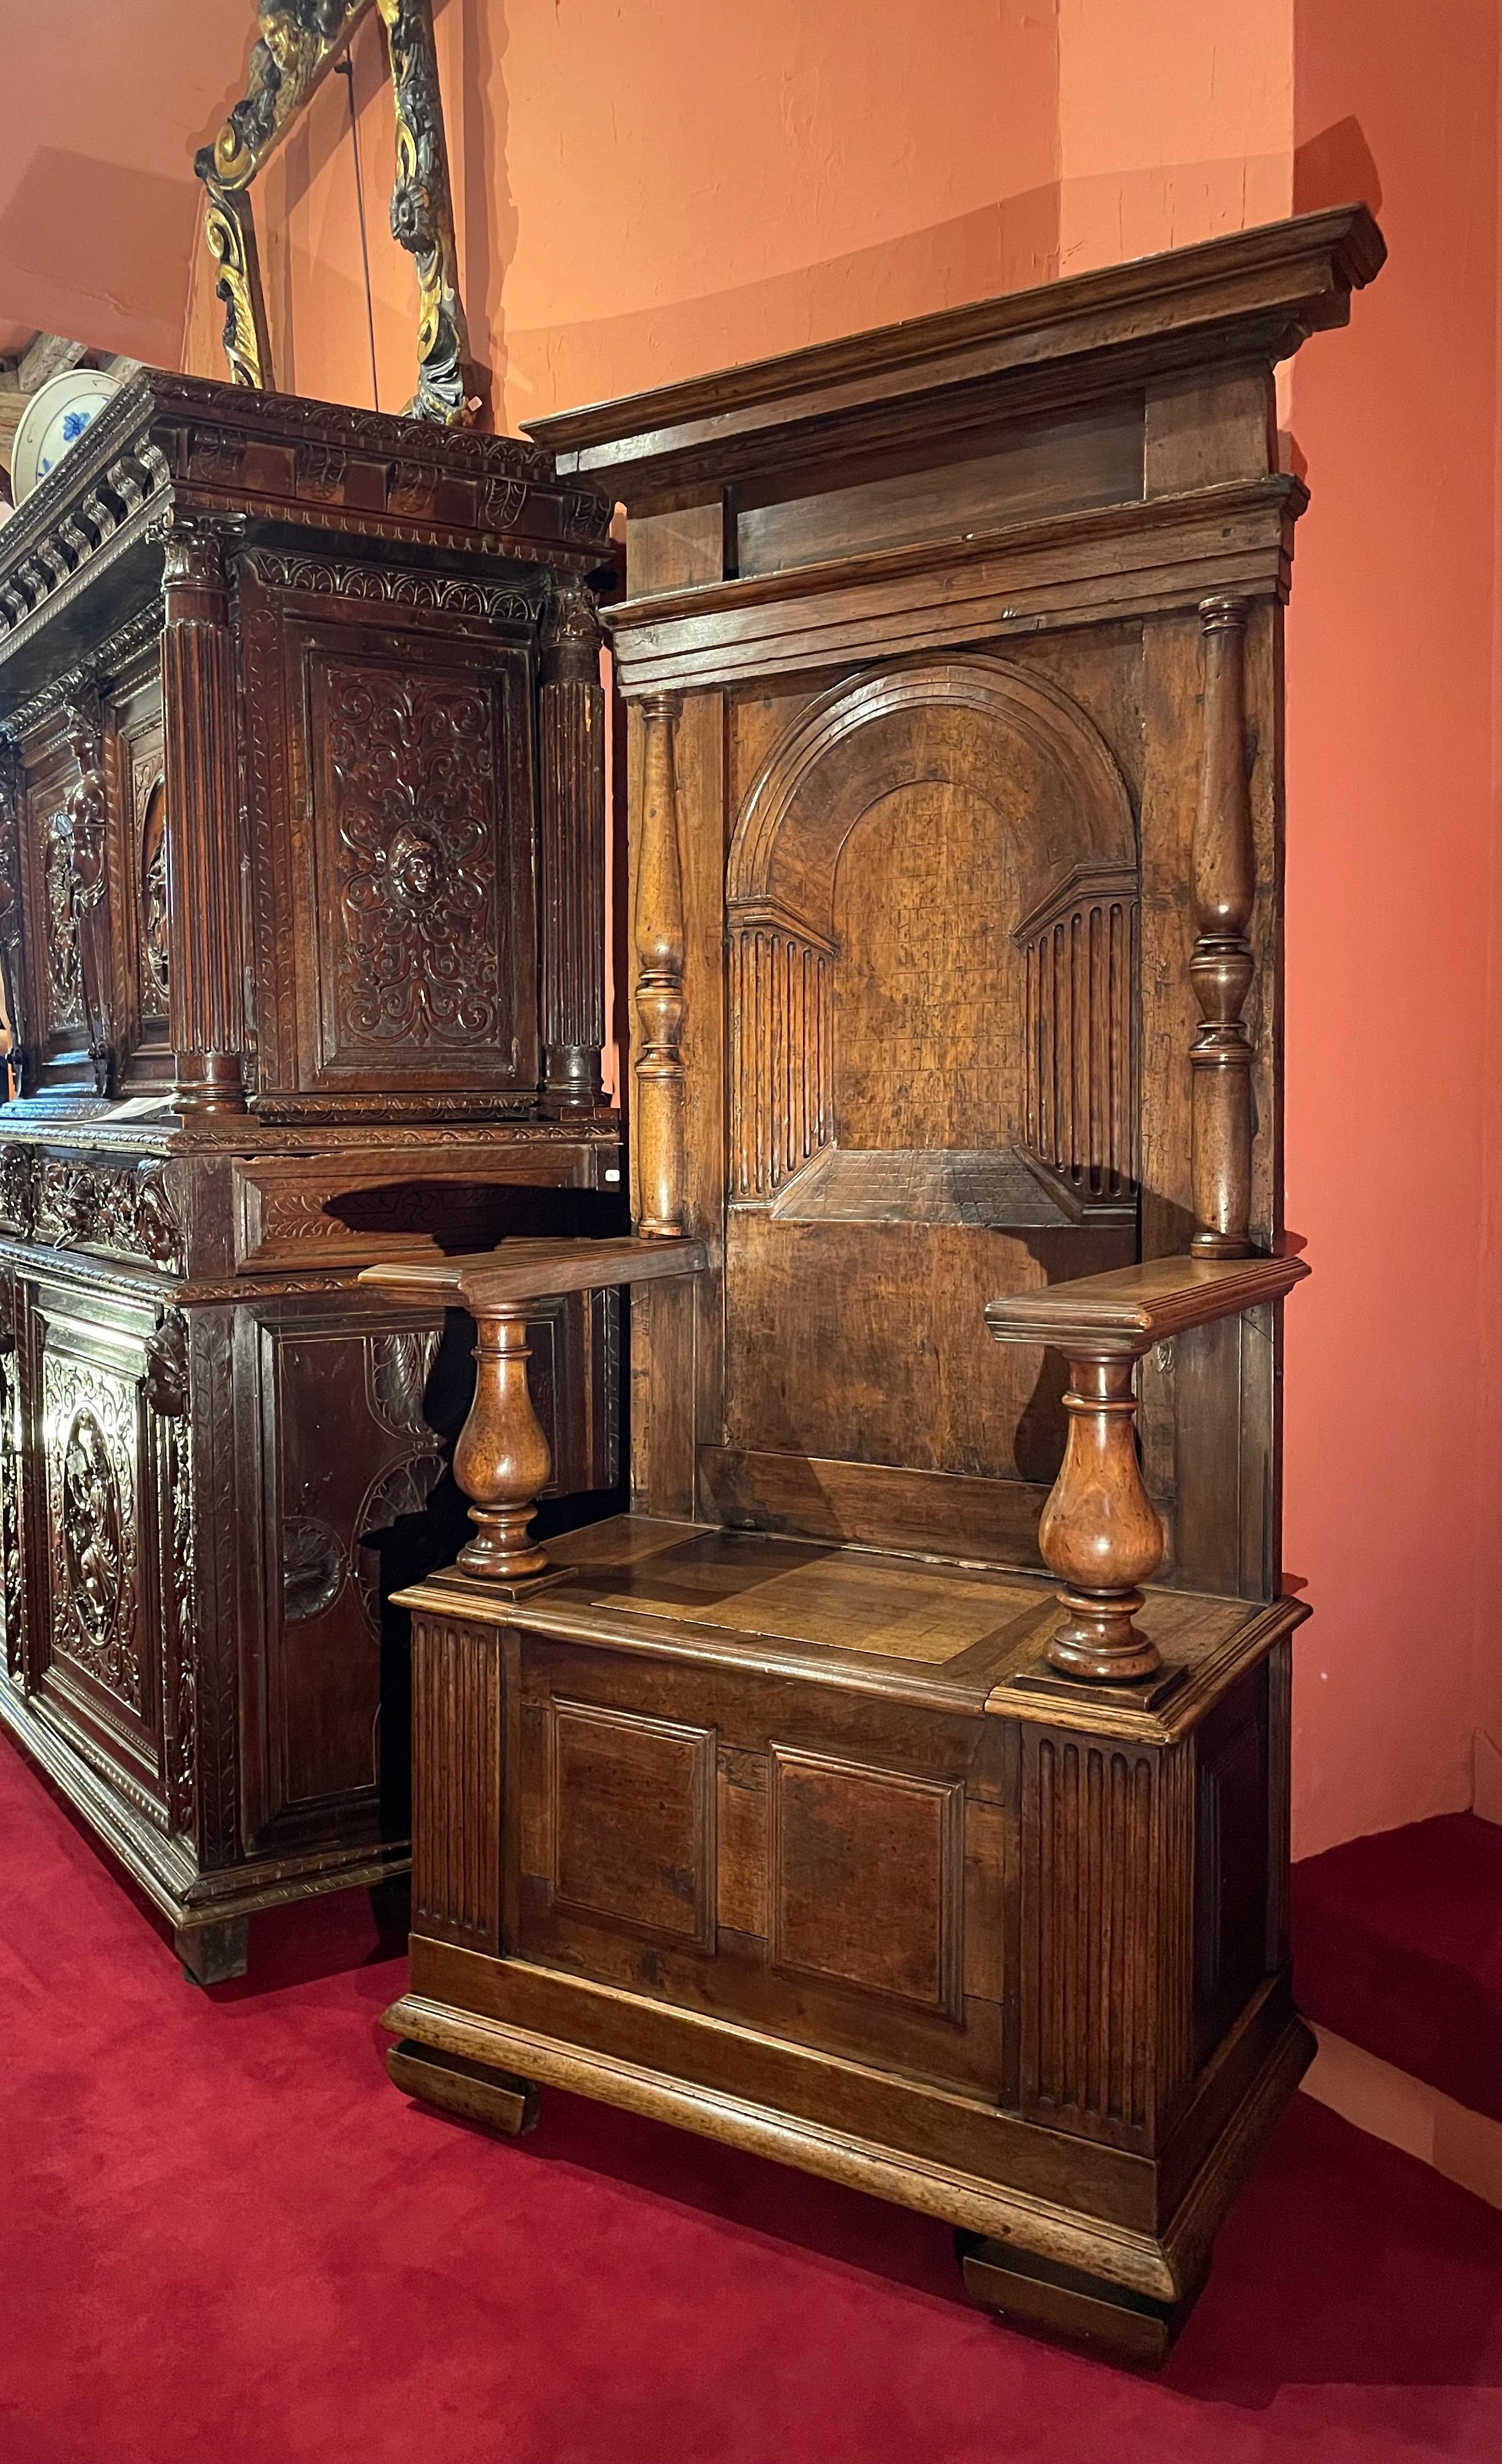 RENAISSANCE CHAYÈRE WITH PERSPECTIVE MOTIF

ORIGIN: FRANCE, LYON
ÉPOQUE: FIRST HALF OF THE XVI CENTURY

Height: 166cm
Width: 74cm
Depth: 47cm

Walnut wood 

From: Château de Quintin’s ancient collection 


This chayere or cathedra was made for a a